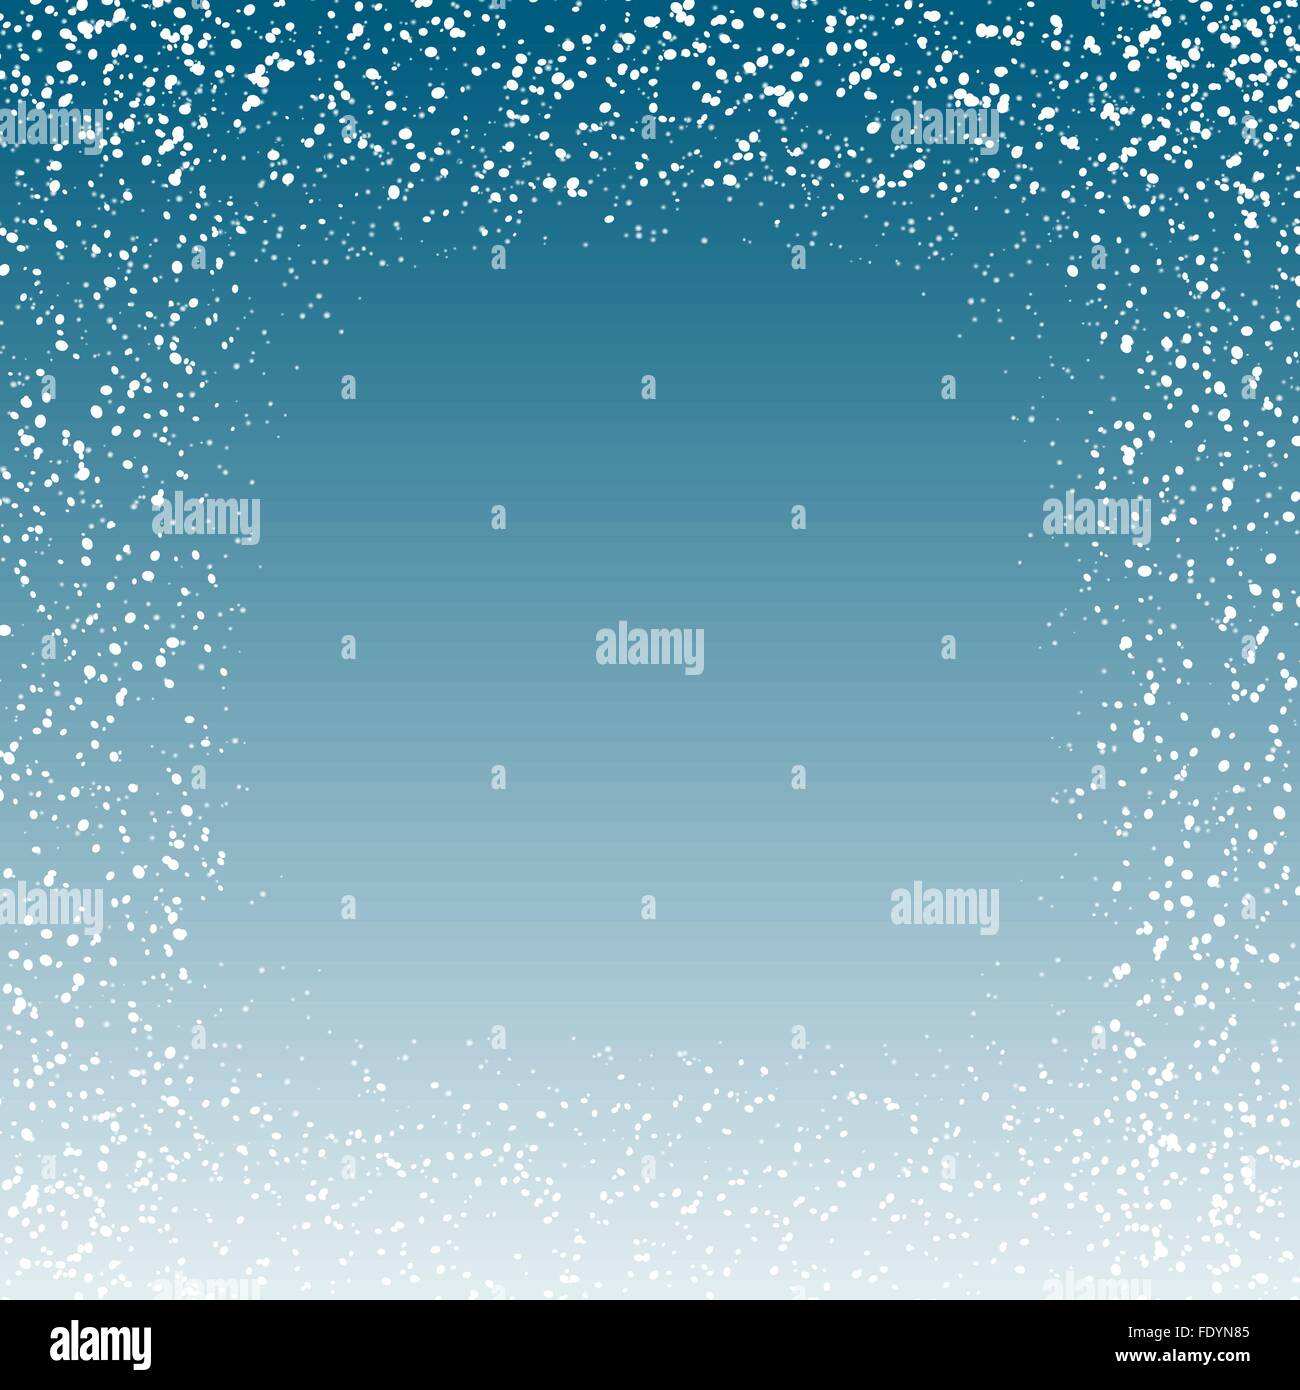 Freeze frame Stock Vector Images - Alamy